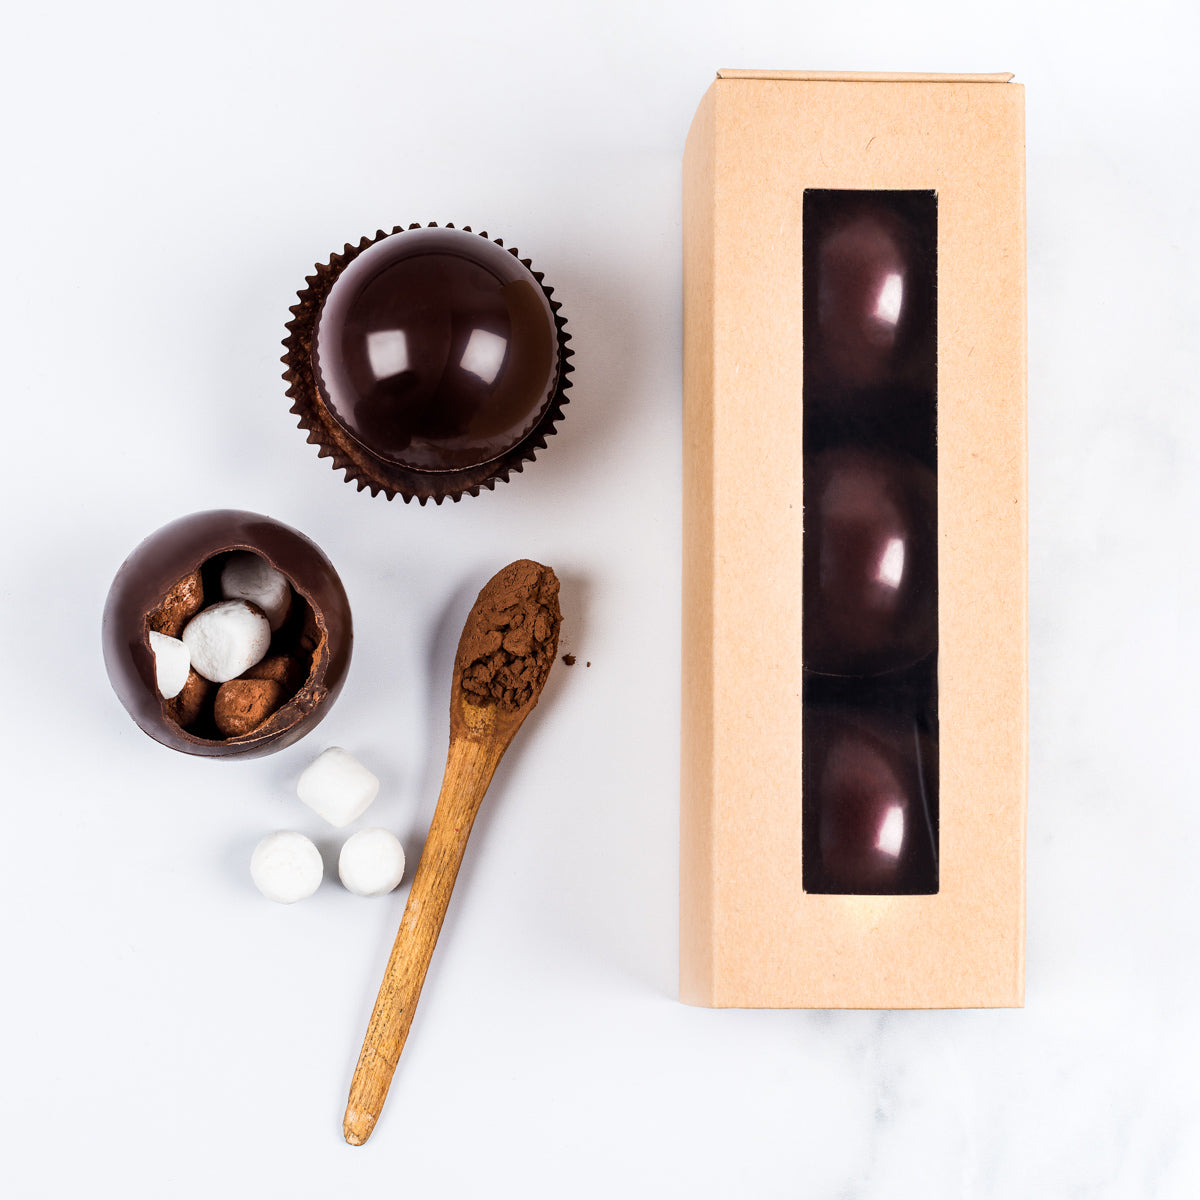 Hot chocolate bombs - Pick up only